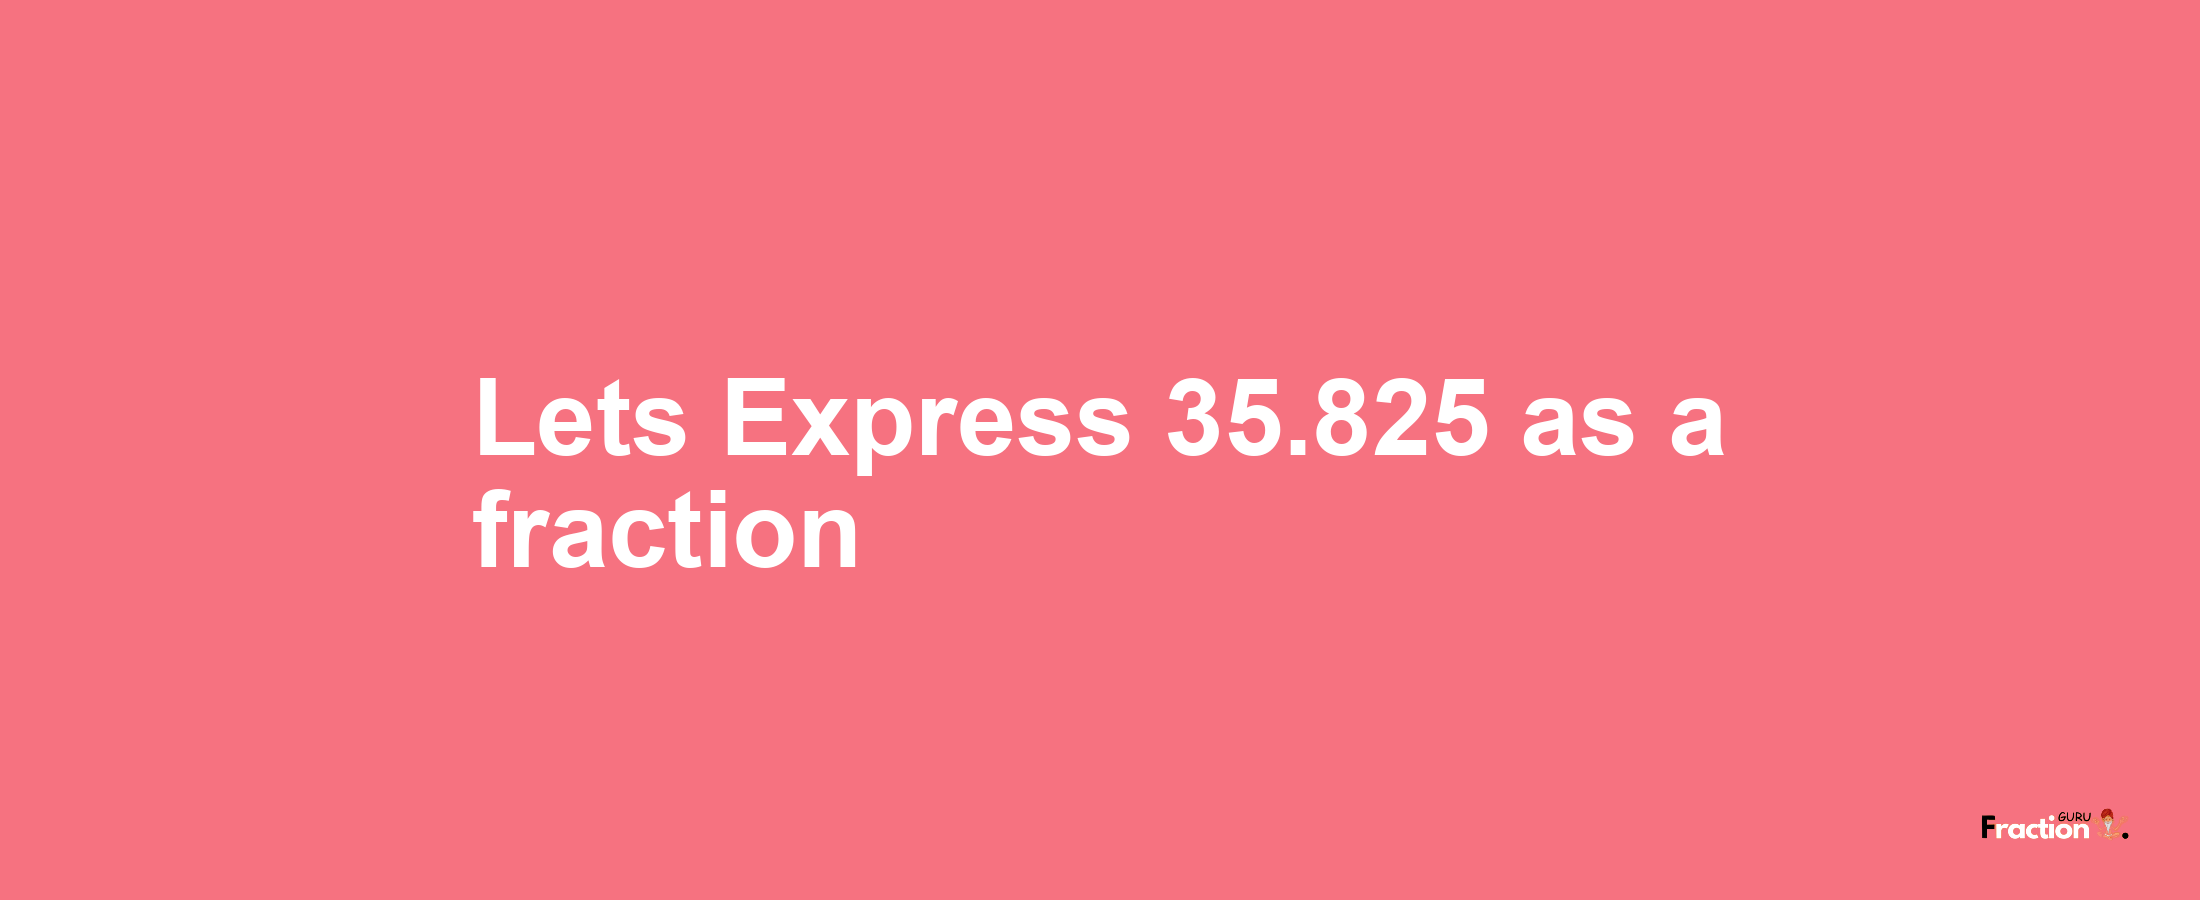 Lets Express 35.825 as afraction